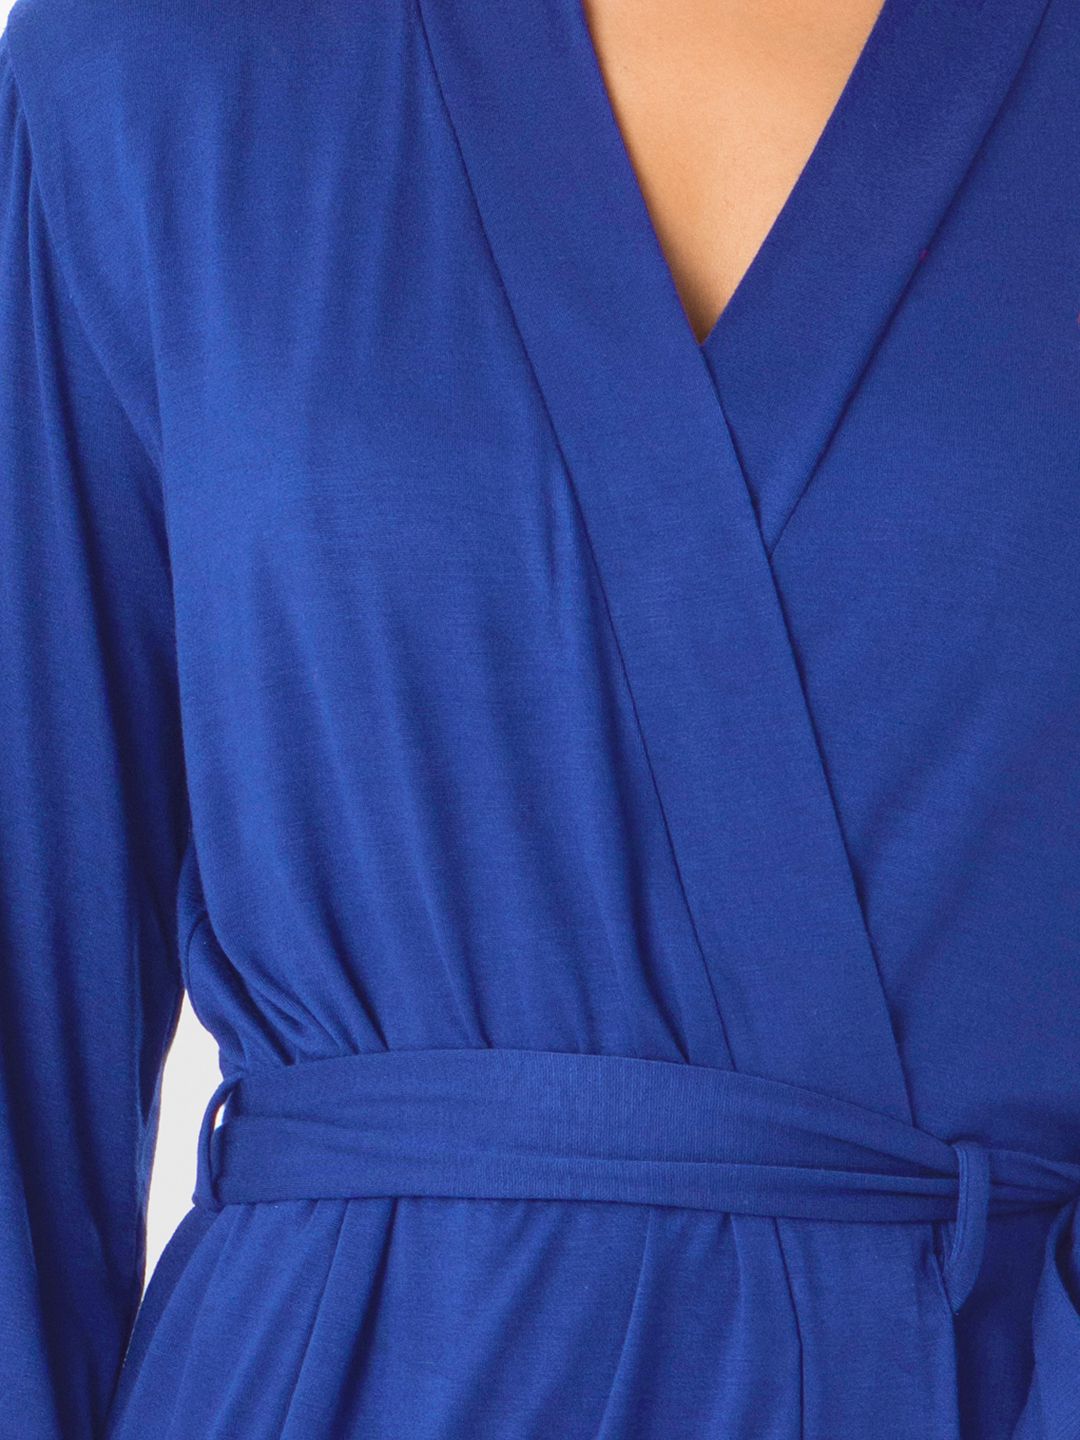 Buy PrettySecrets Viscose Robes - Blue Online at Best Prices in India ...